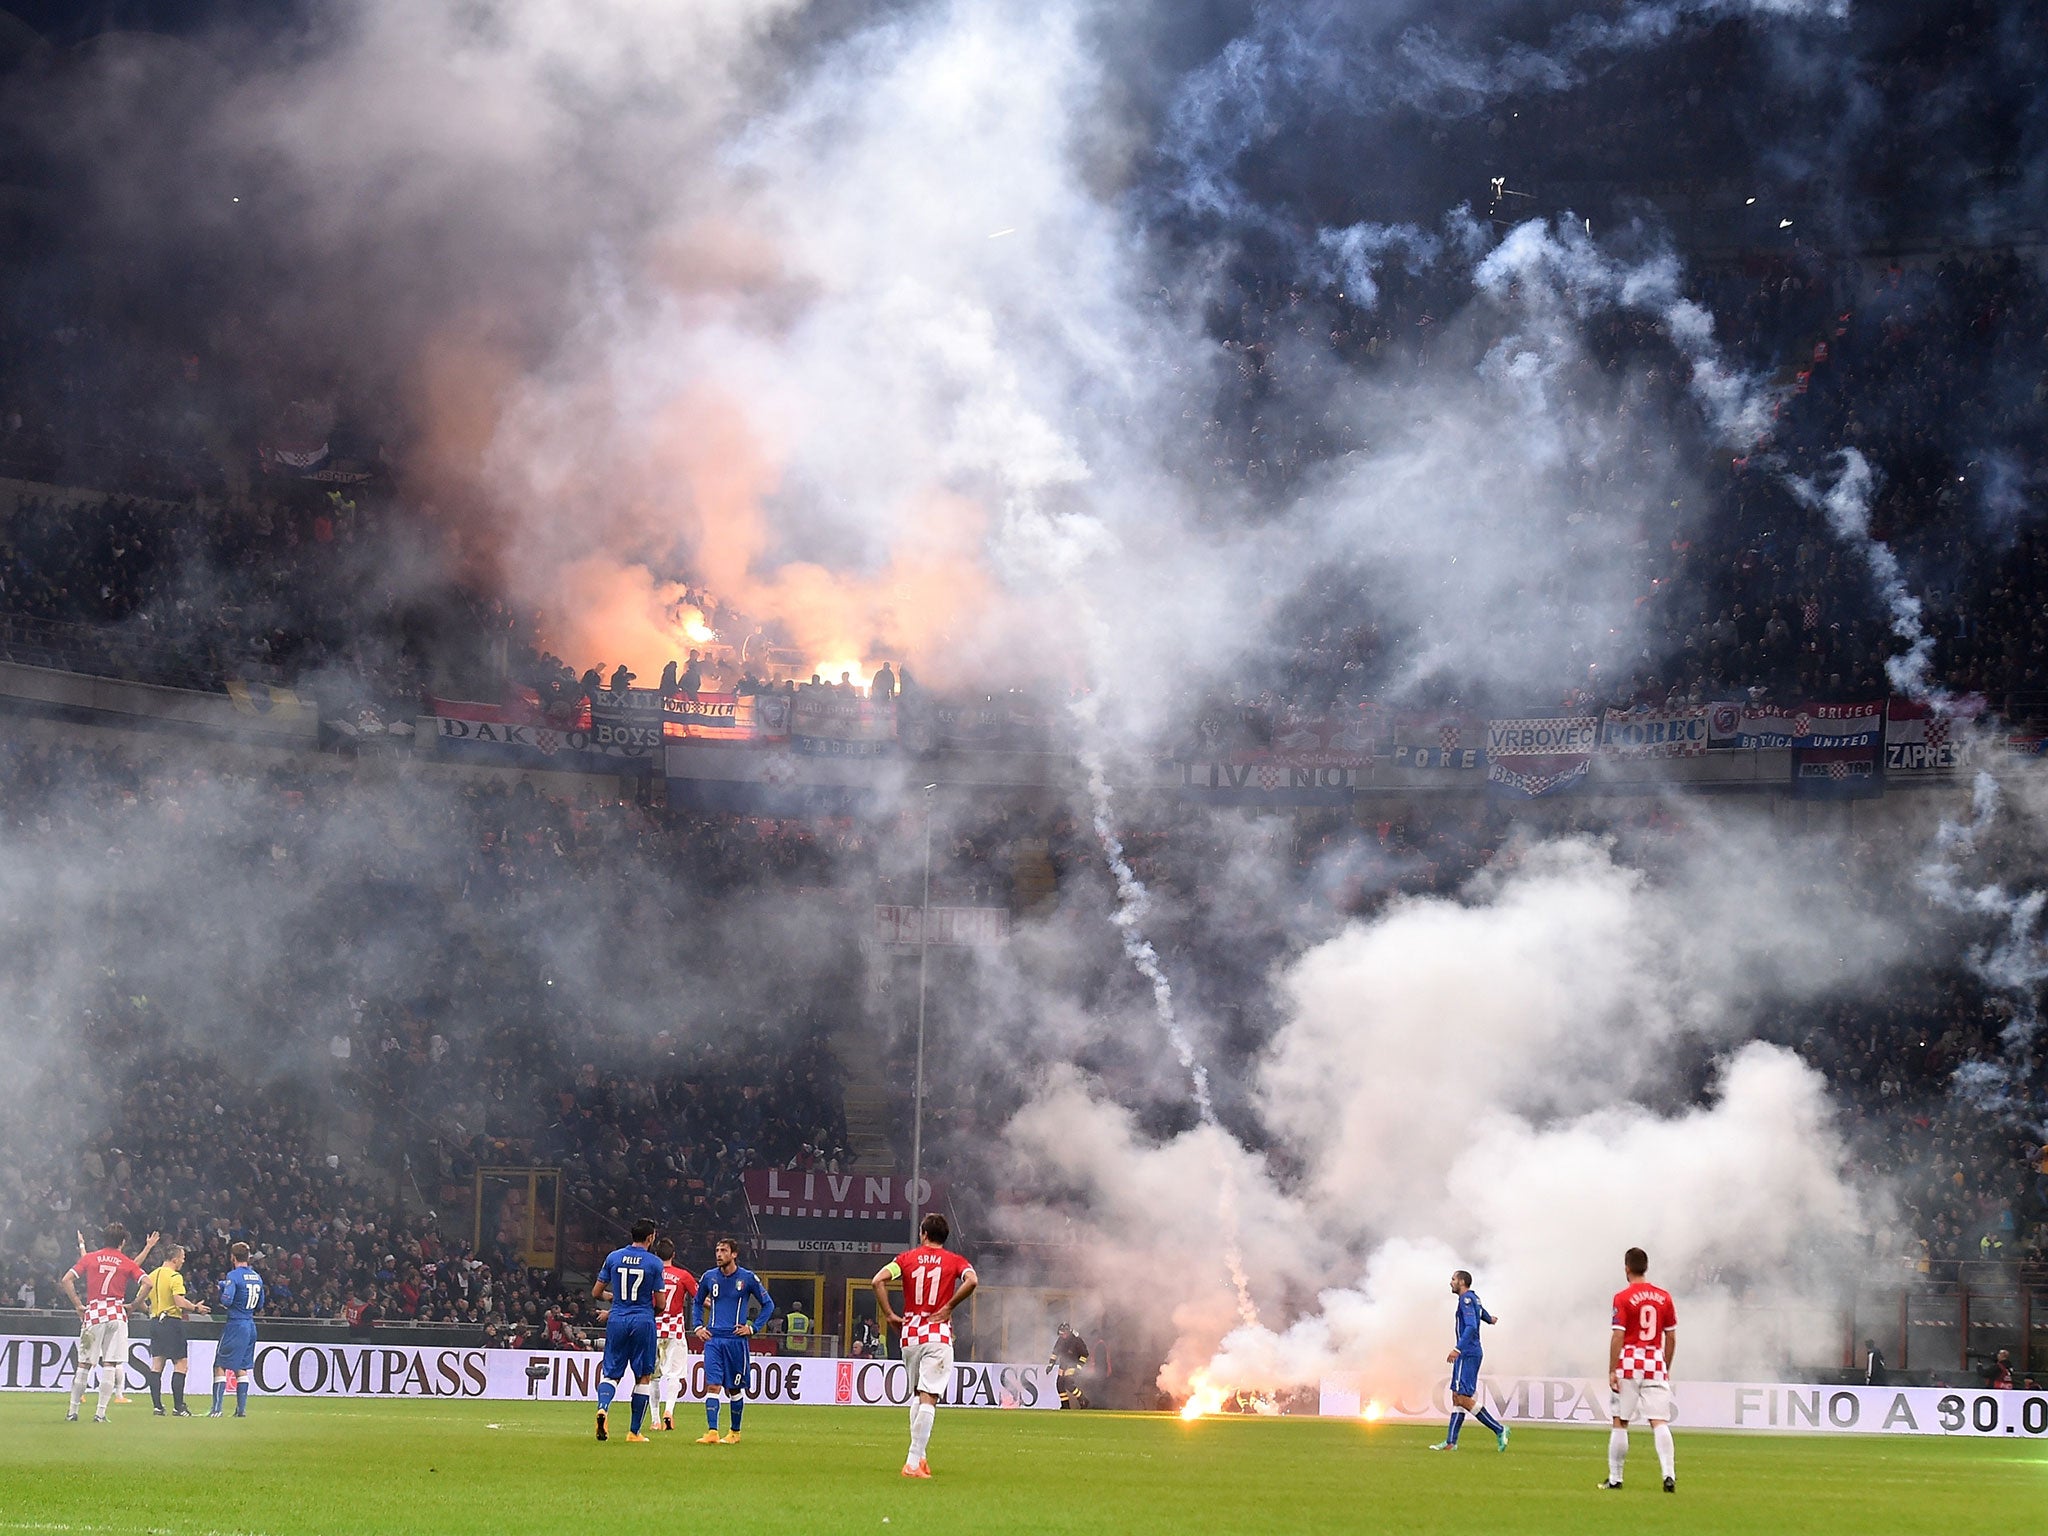 Fans in the away end throw flares onto the pitch as crowd trouble marred the 1-1 draw between Italy and Croatia